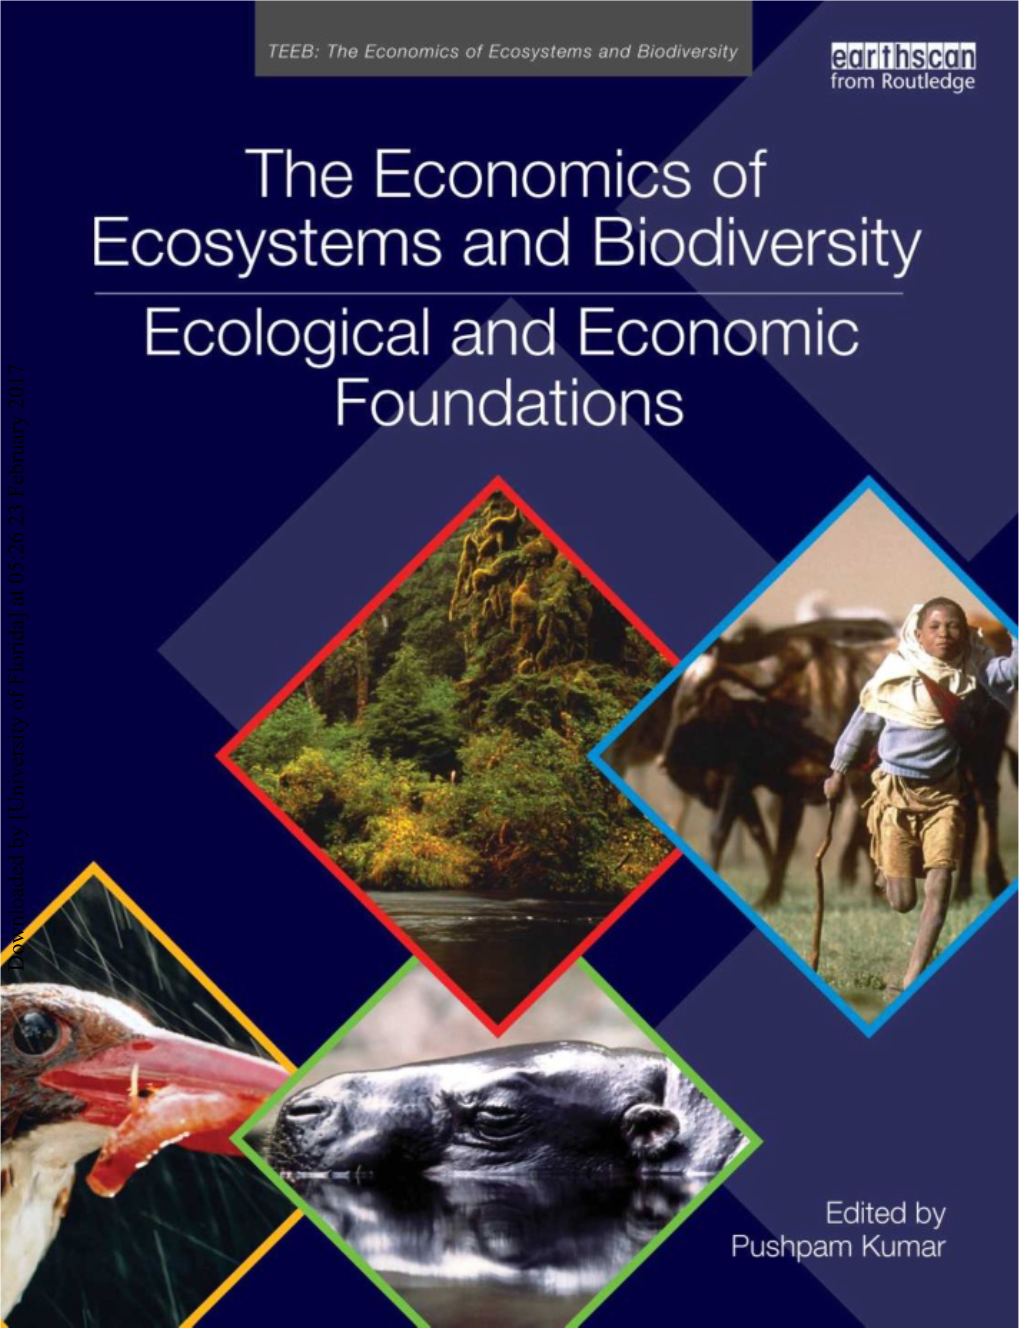 The Economics of Ecosystems and Biodiversity Ecological and Economic Foundations